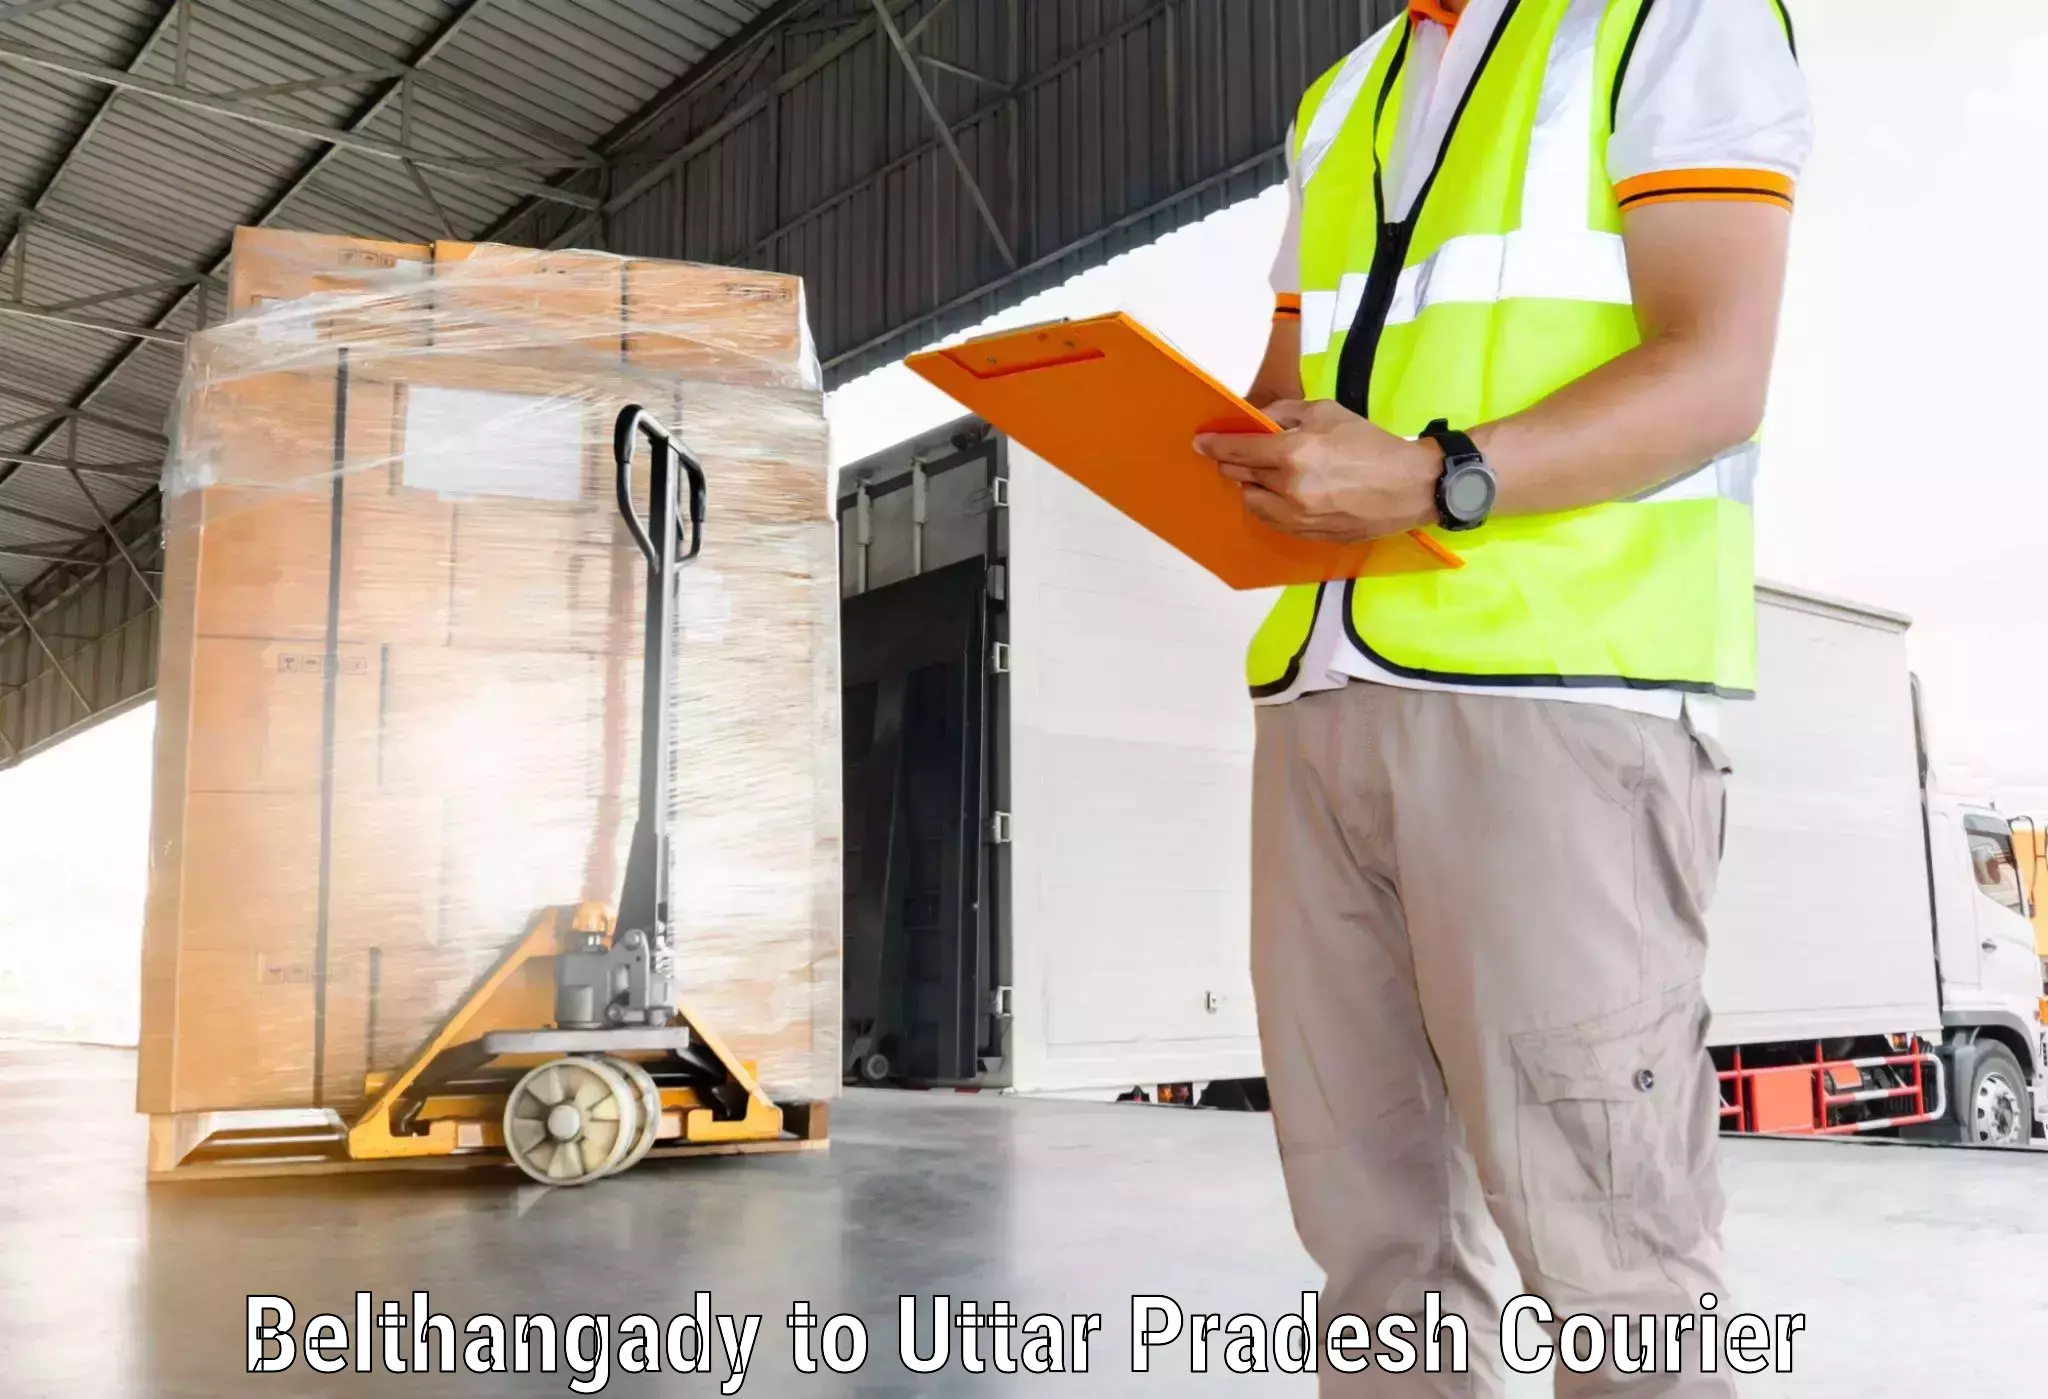 On-demand shipping options Belthangady to Rath